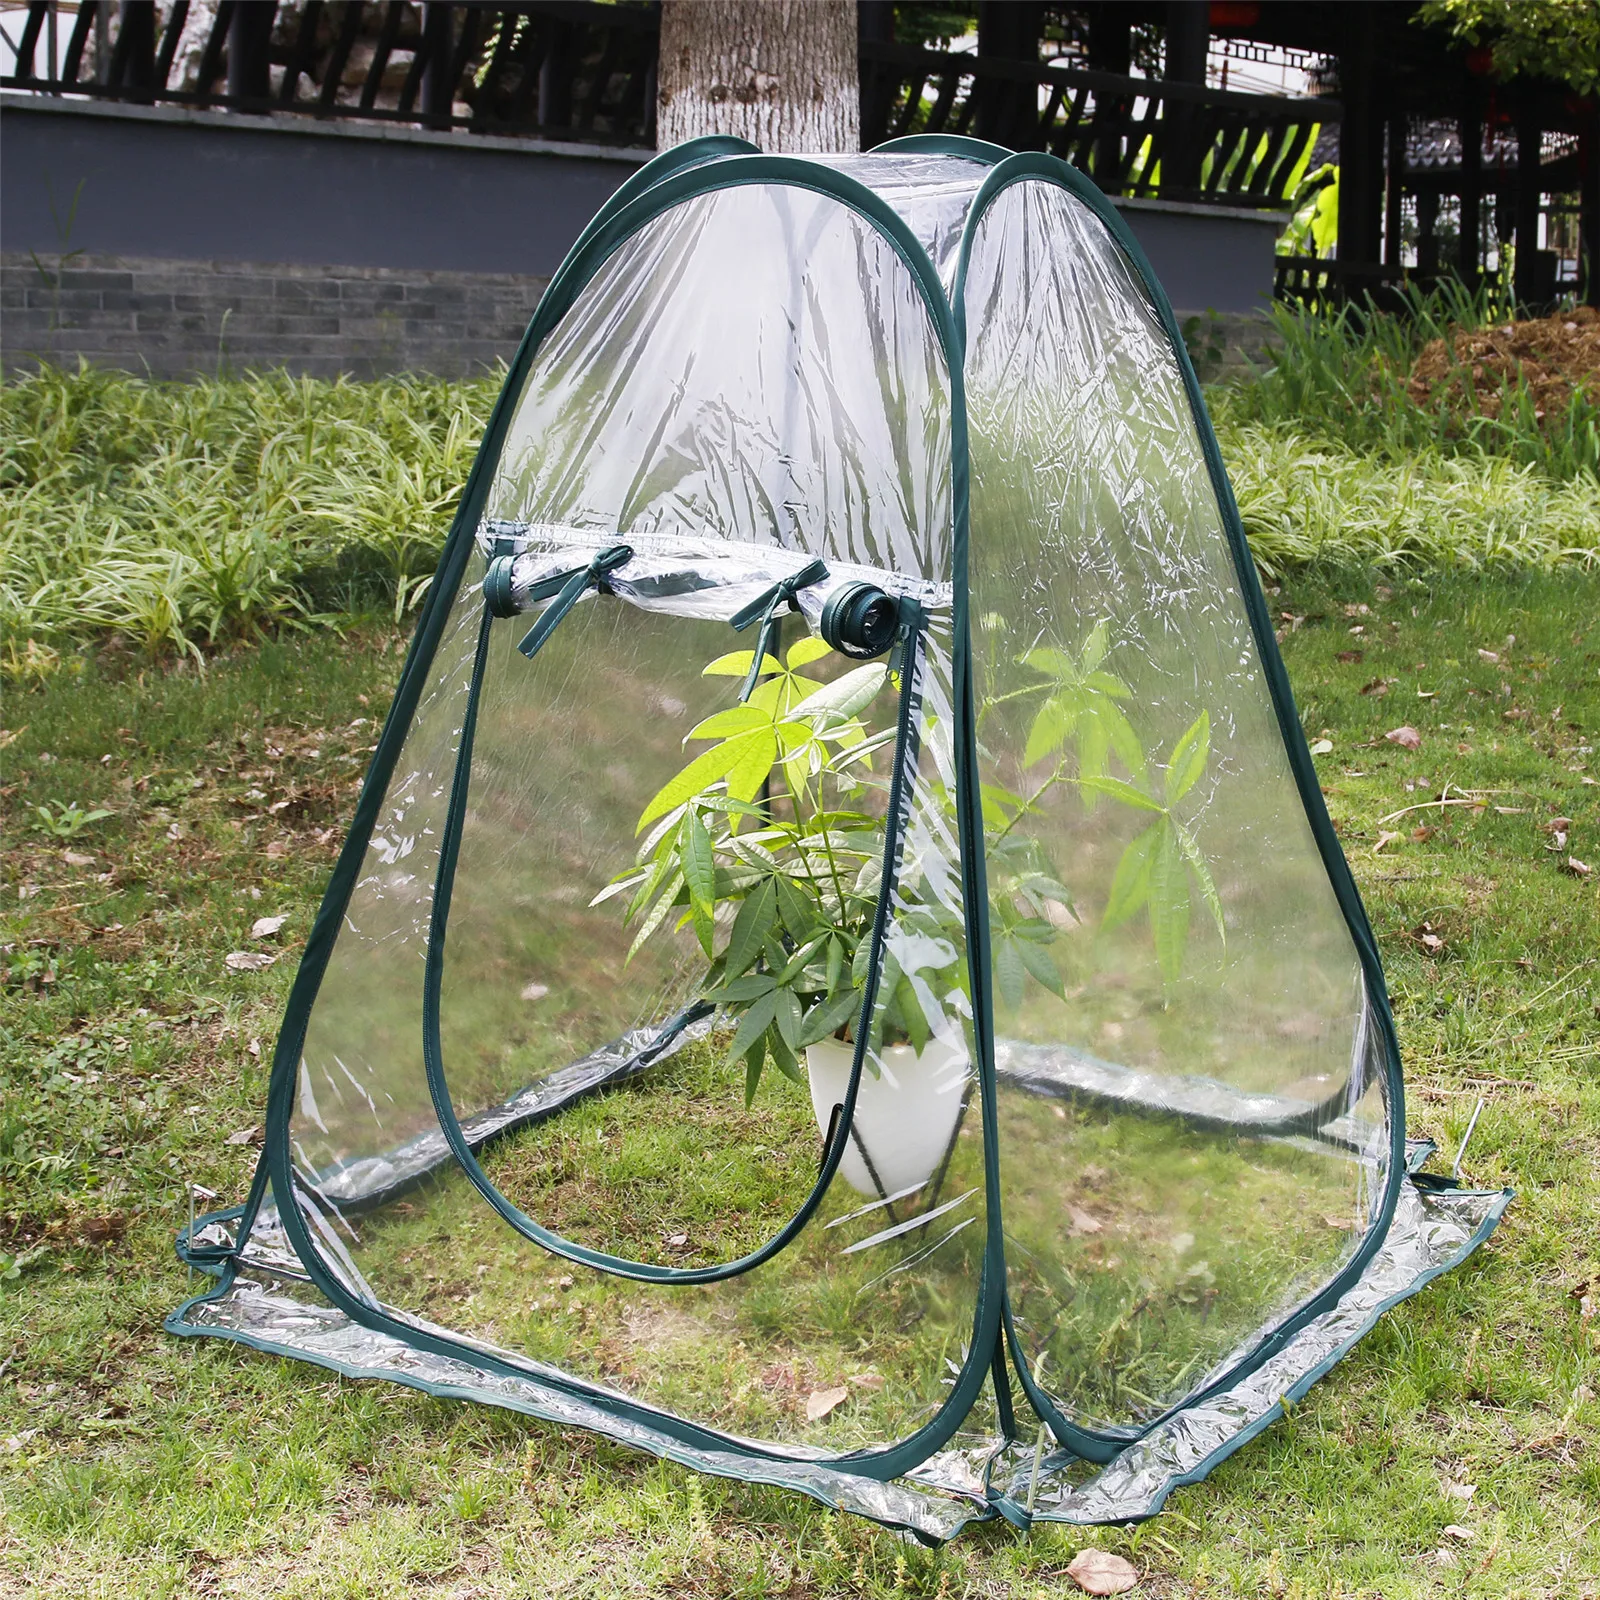 ANGTUO Mini Pop Up Greenhouse Small Gardening Flowerpot Cover Portable Greenhouse for Indoor Outdoor Backyard Flower Shelter 28x28x33 